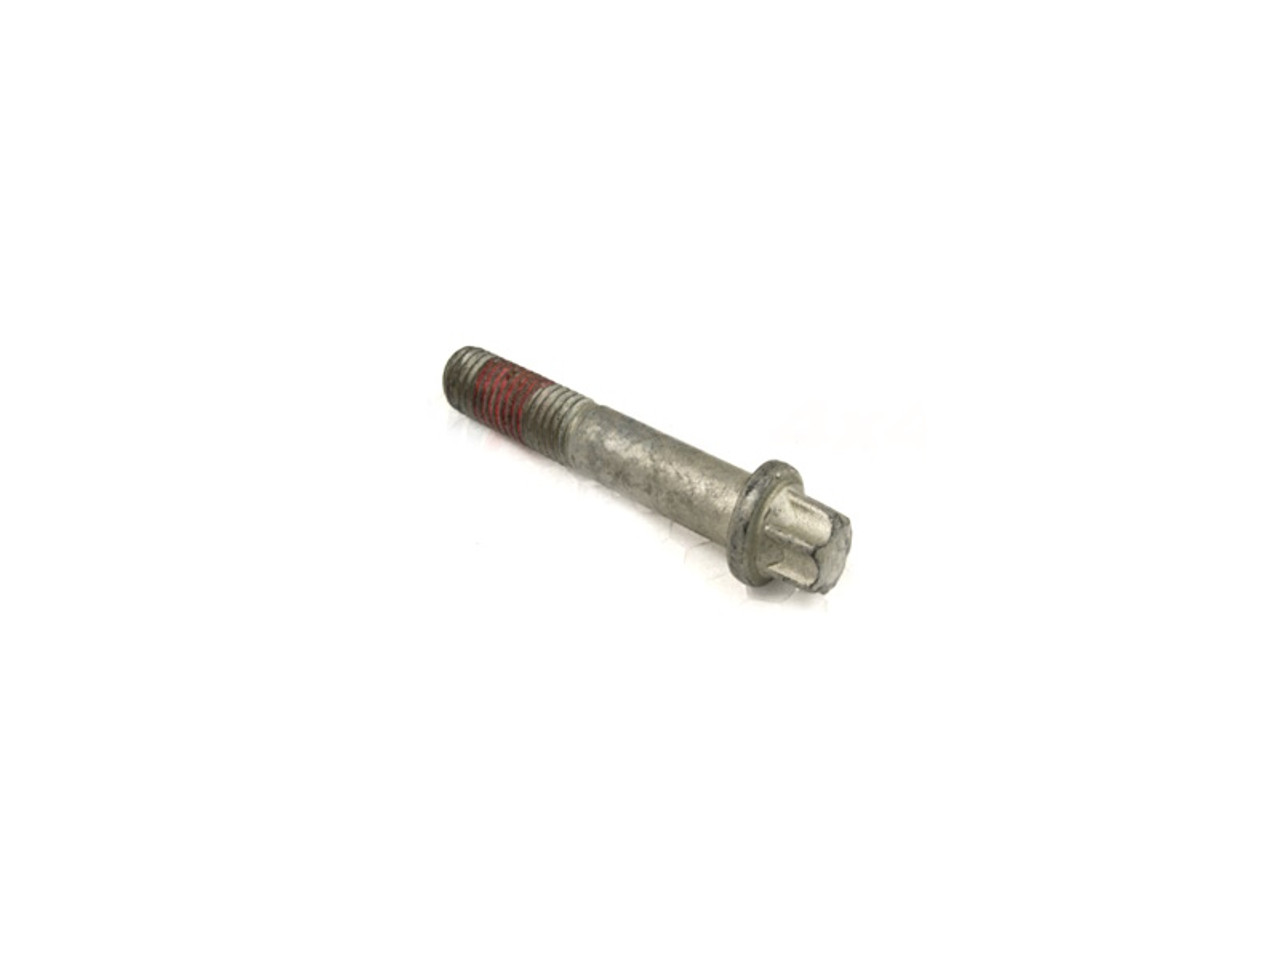 Allmakes 4x4 Discovery and Range Rover Propshaft  Bolt - TYG500141